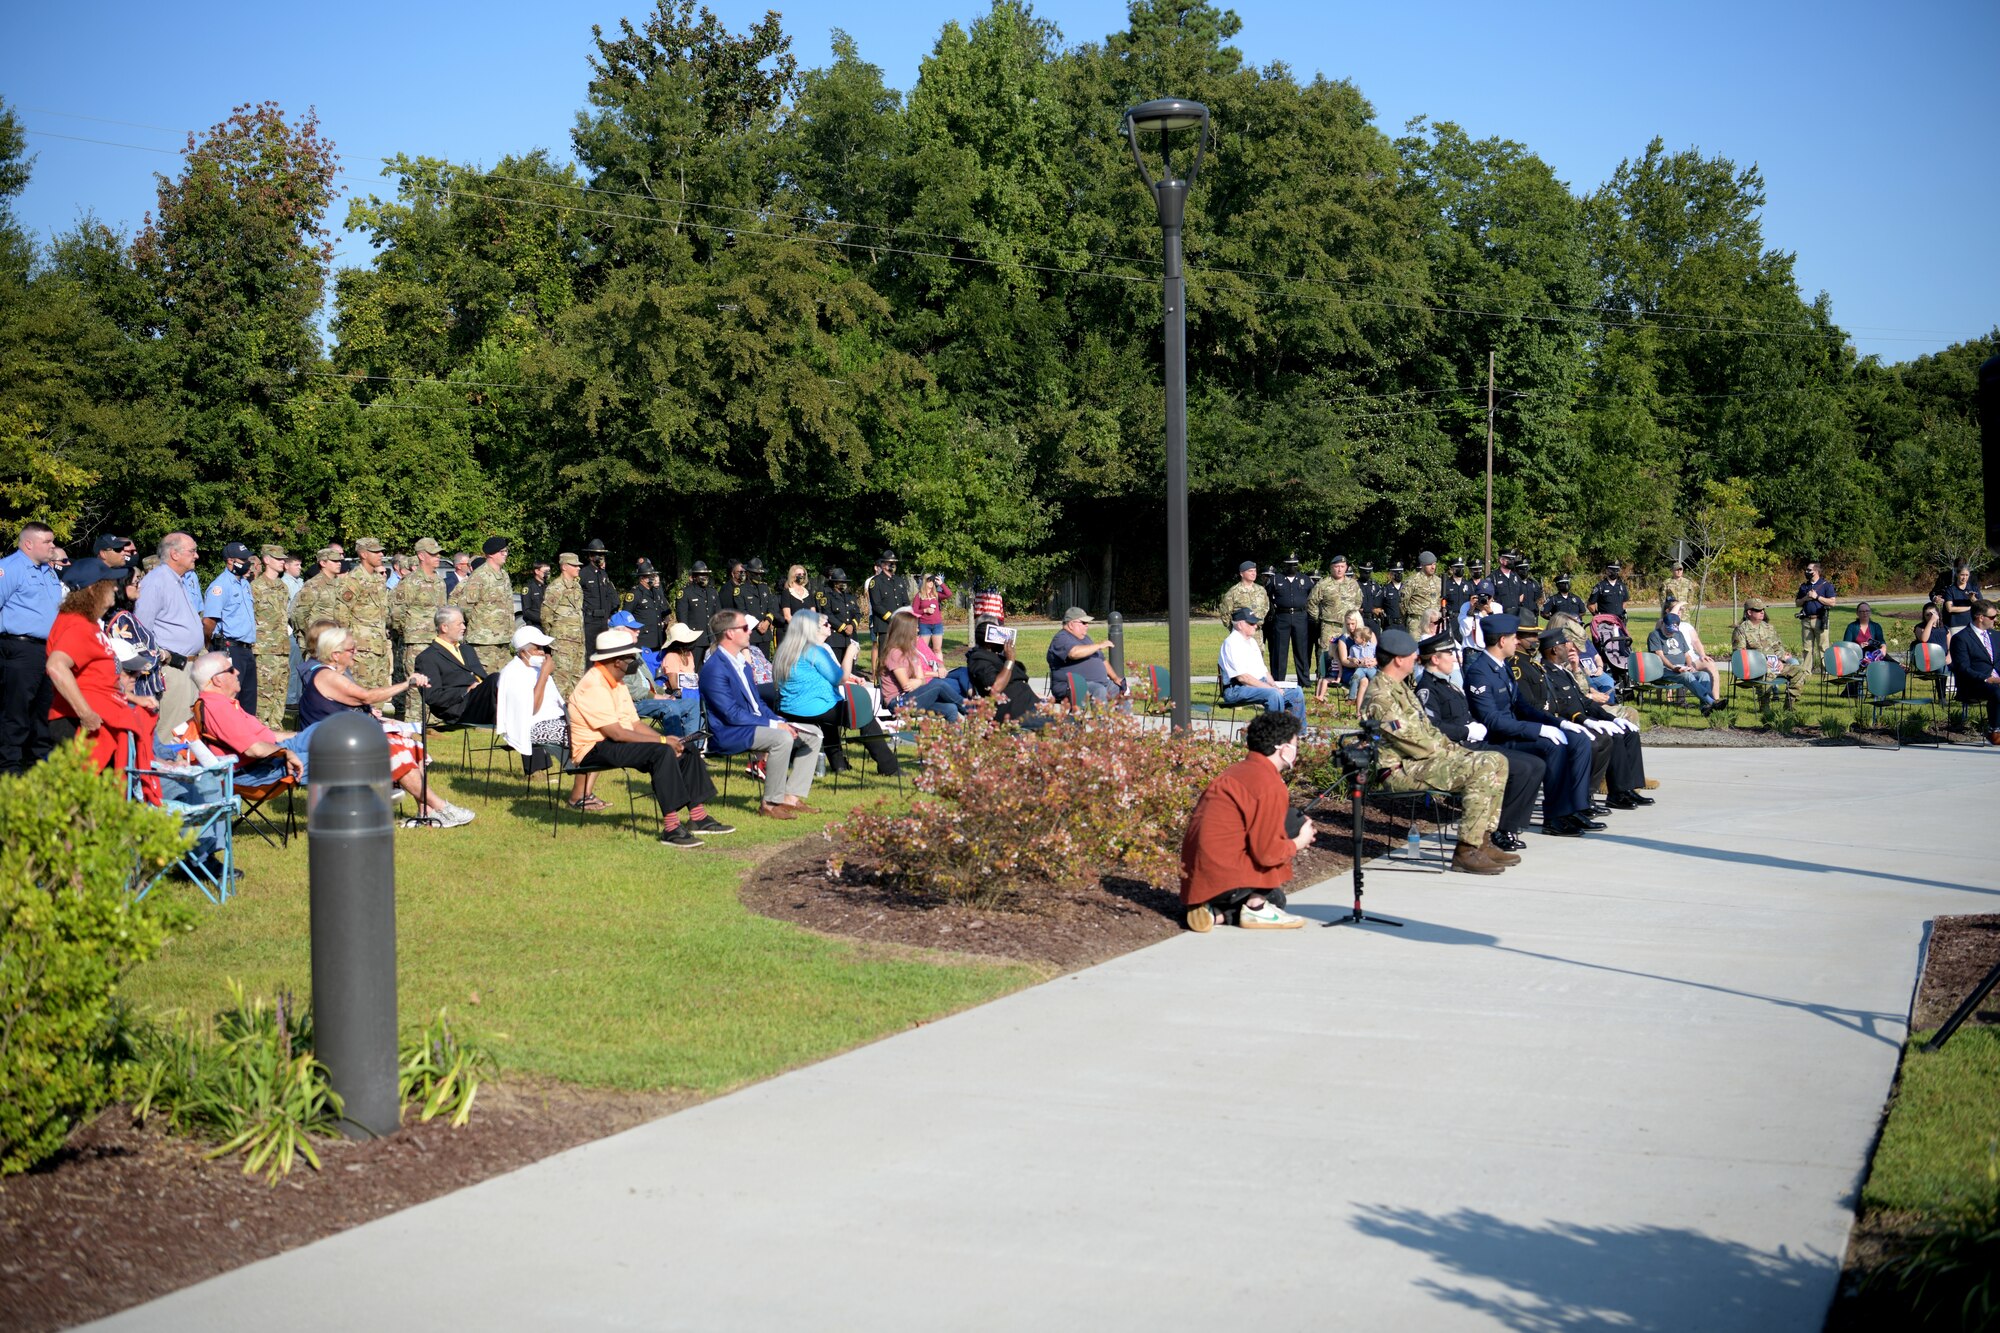 Members of the Shaw Air Force Base and Sumter communities attend a 9/11 memorial ceremony in Sumter, S.C., Sept. 11, 2021. The ceremony was held in remembrance of the 20th anniversary of the Sept. 11, 2001, attacks across the United States. (U.S. Air Force photo by Staff Sgt. K. Tucker Owen)